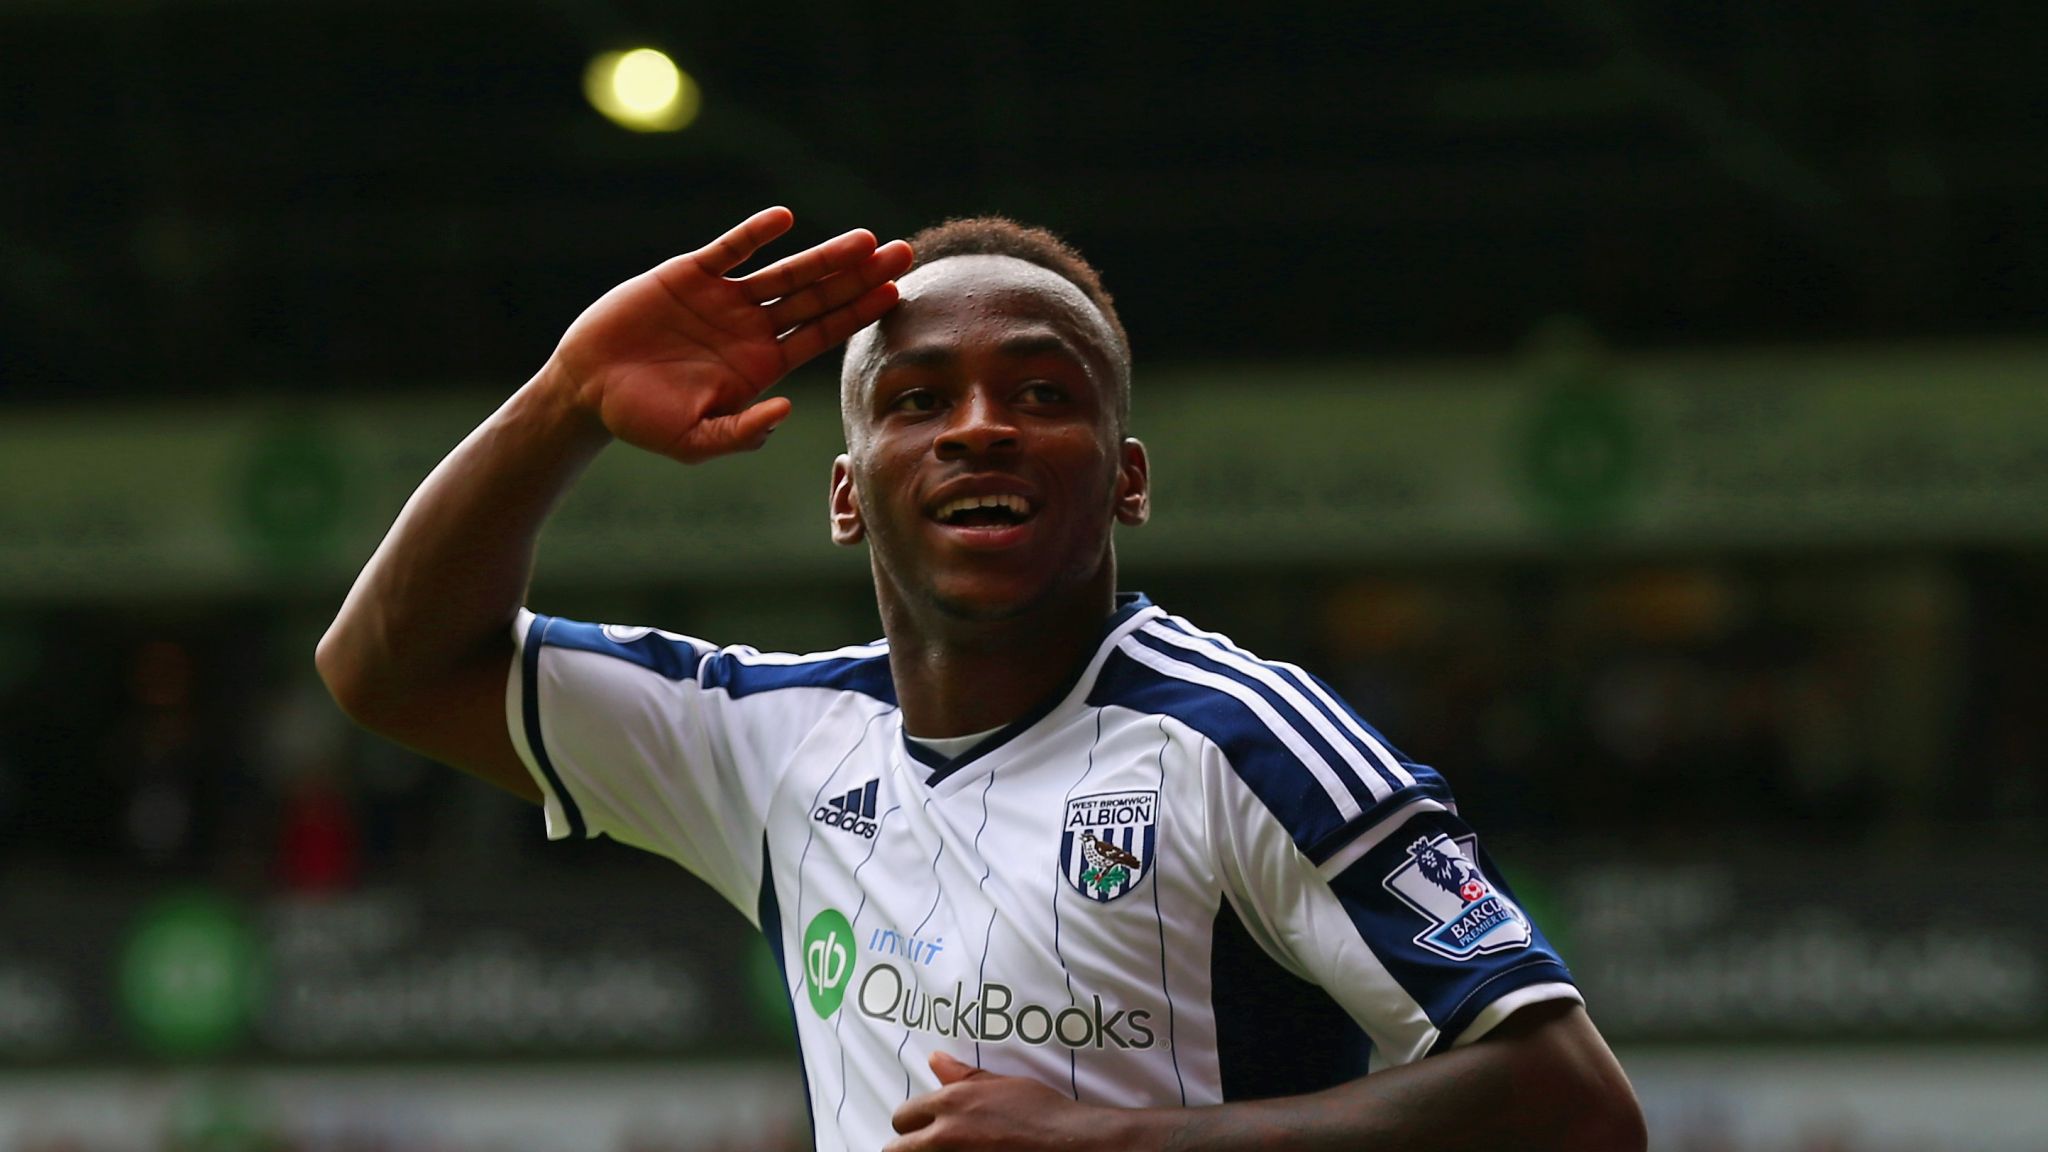 West Brom tell players: Be back next week